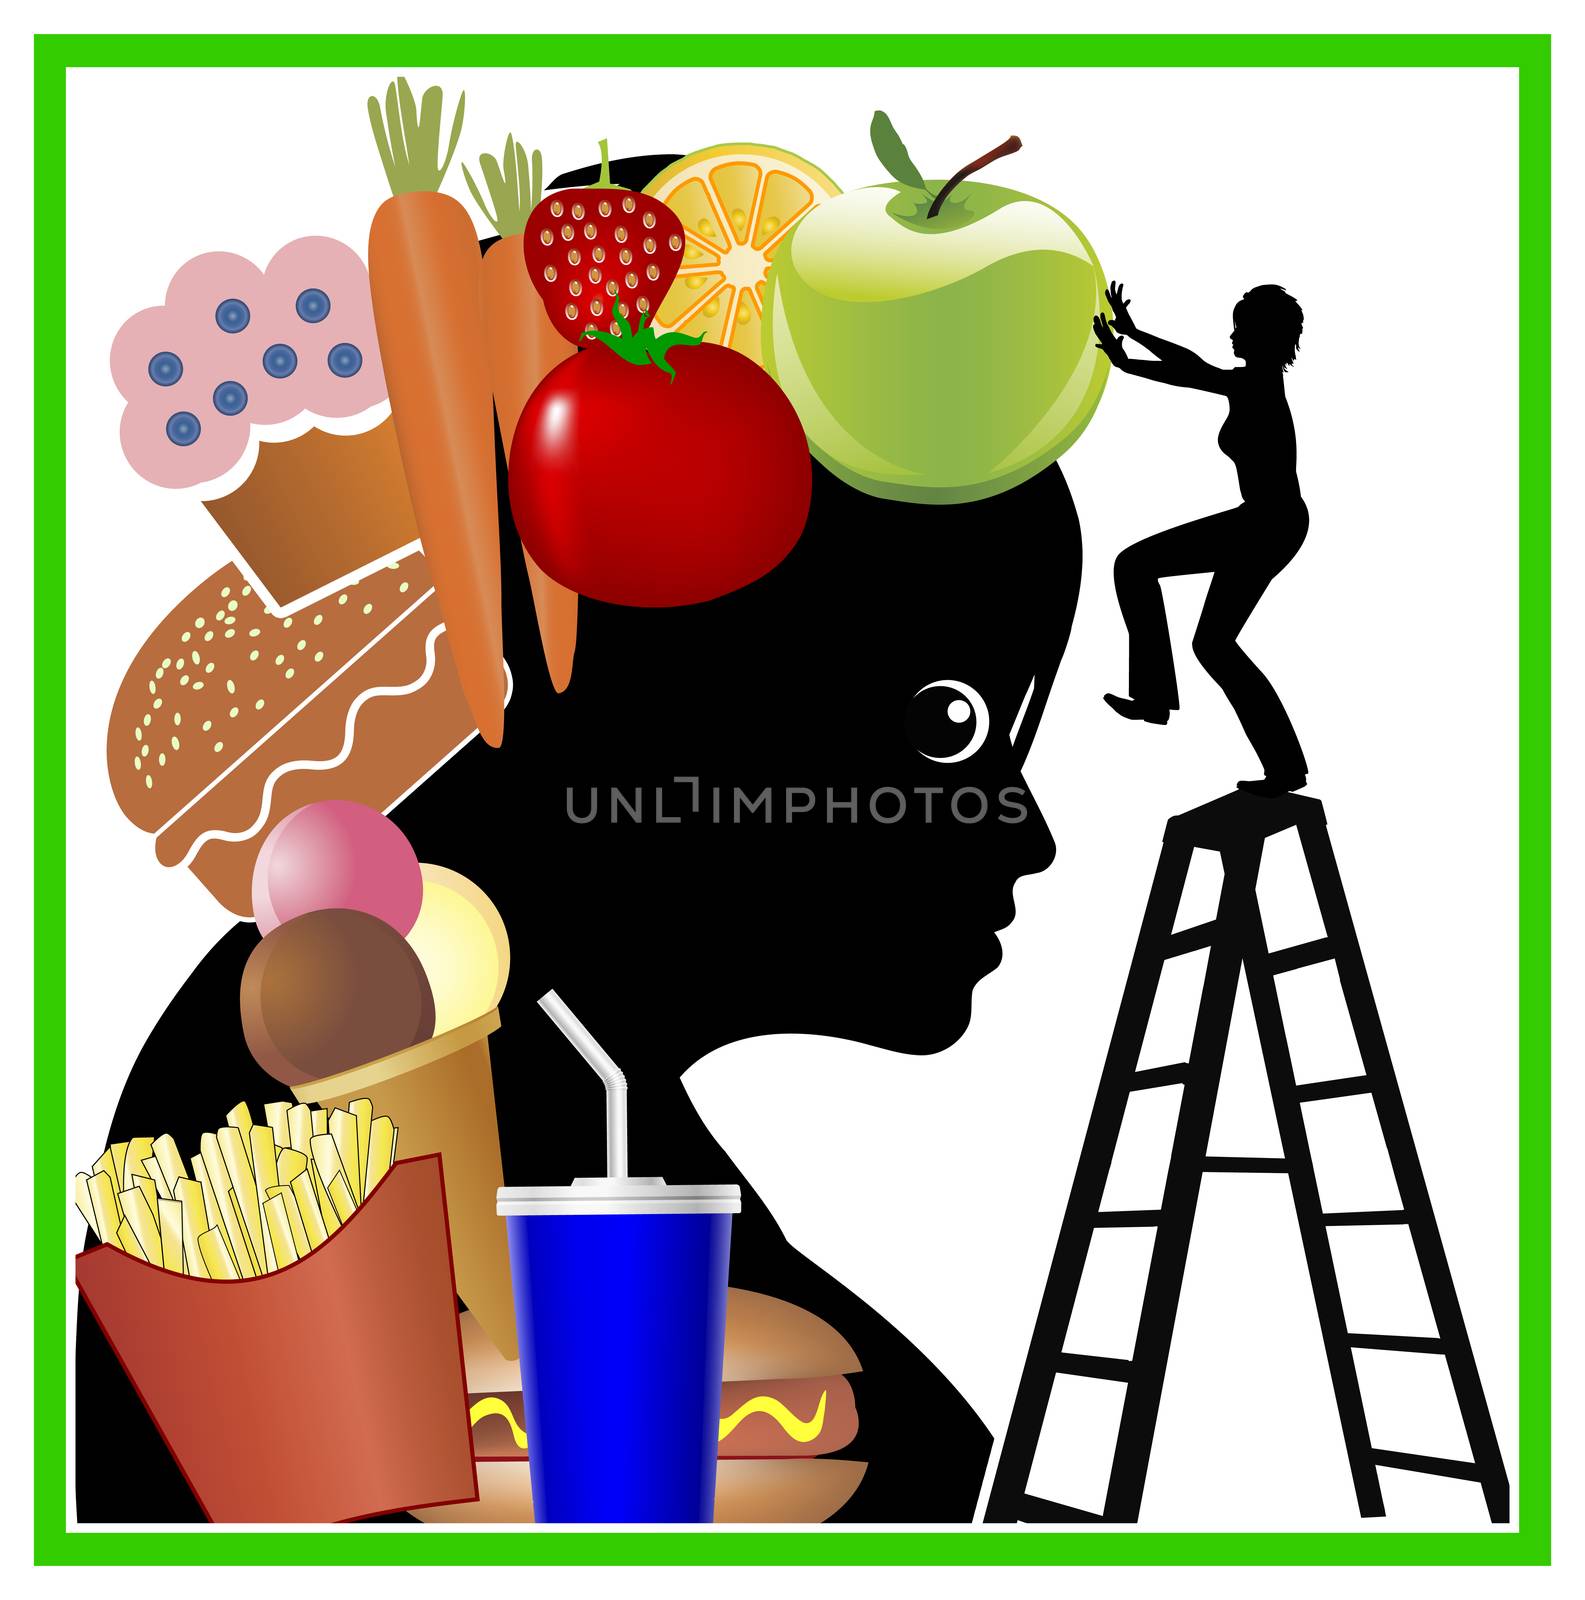 Impact of nutrition counseling in order to change bad food habits

